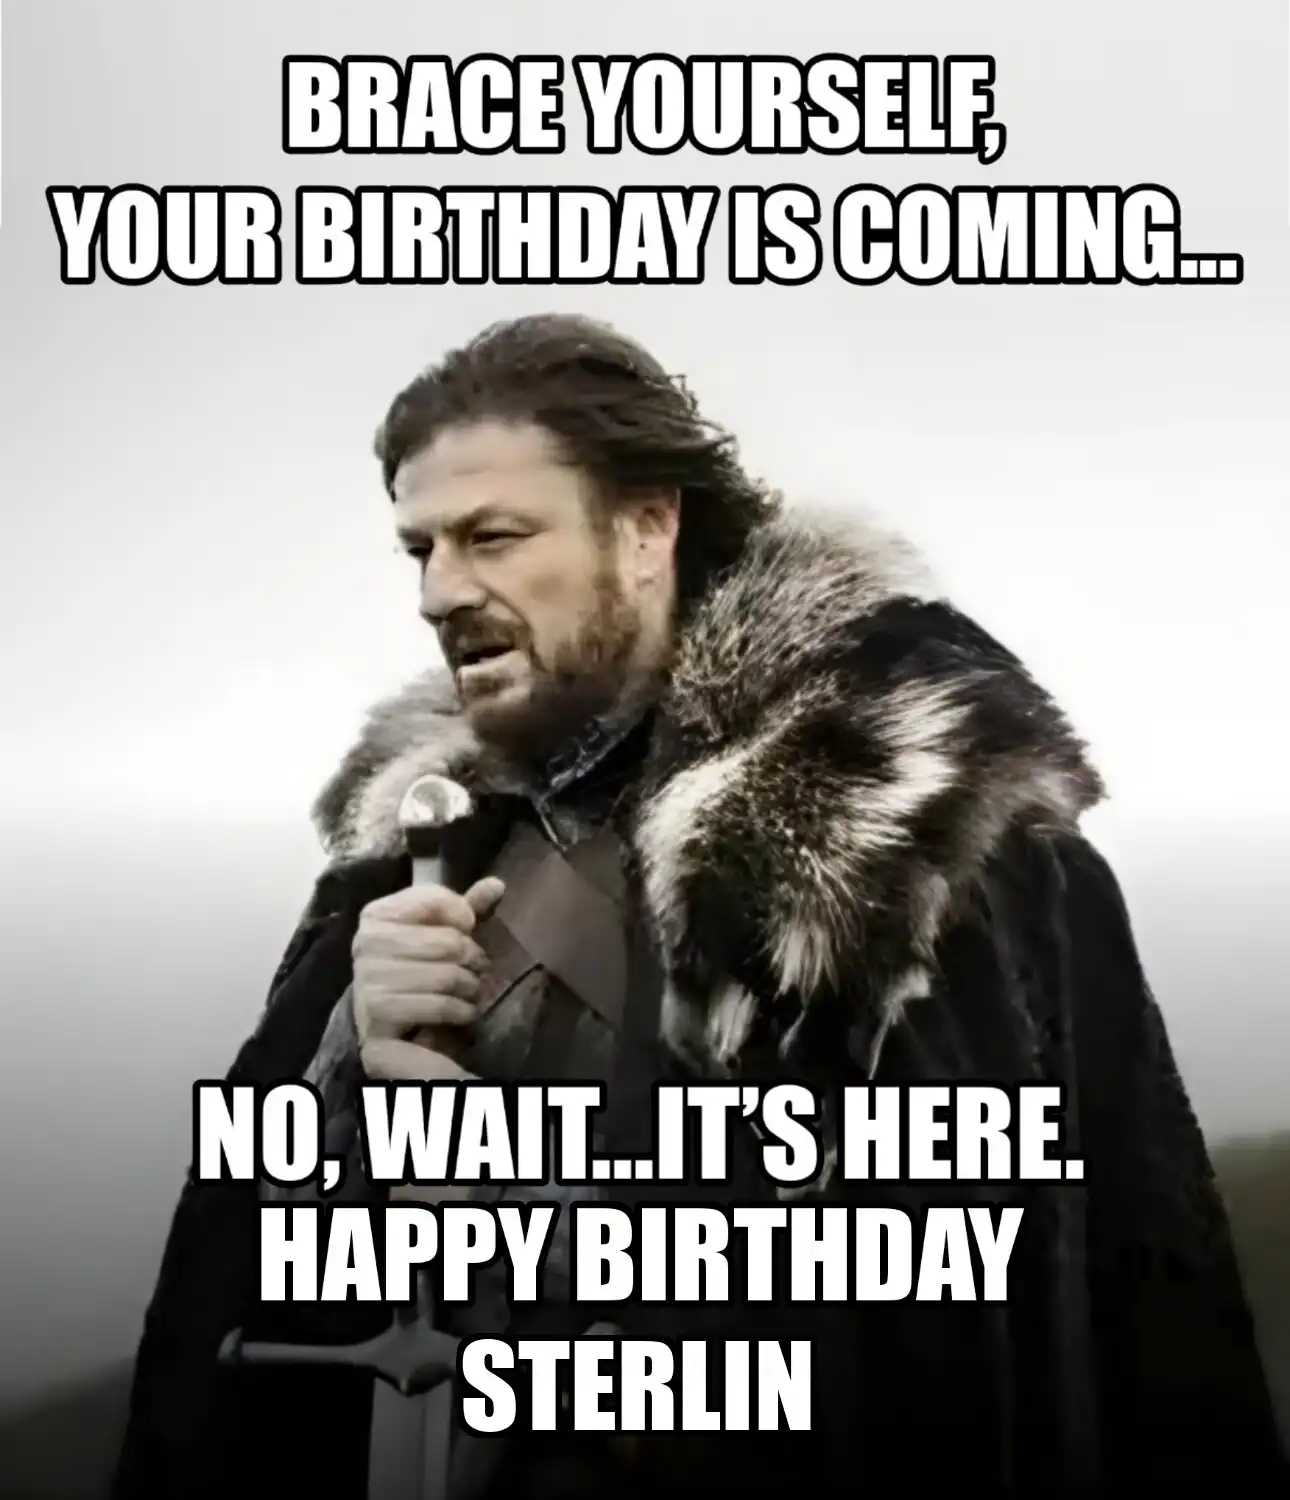 Happy Birthday Sterlin Brace Yourself Your Birthday Is Coming Meme